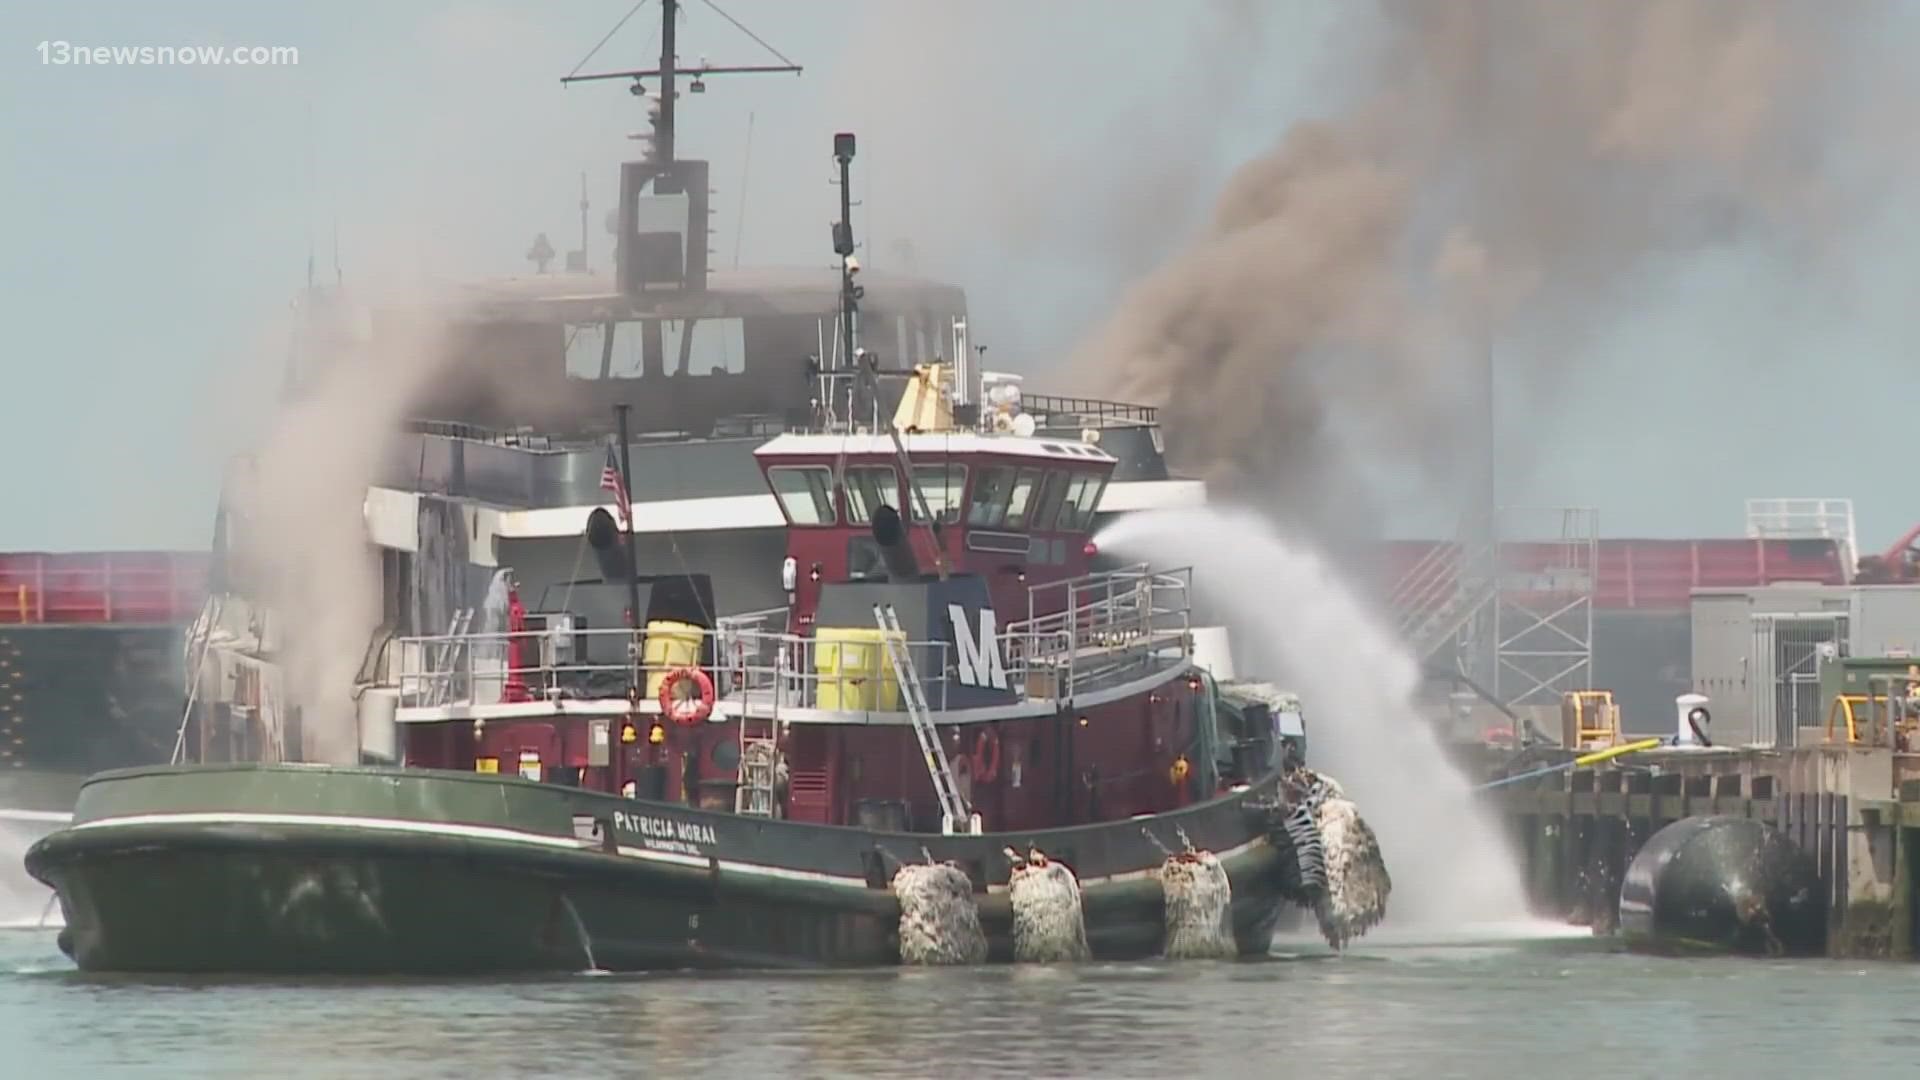 For the last week, the Coast Guard held these hearings to investigate the fire that destroyed the vessel last June.